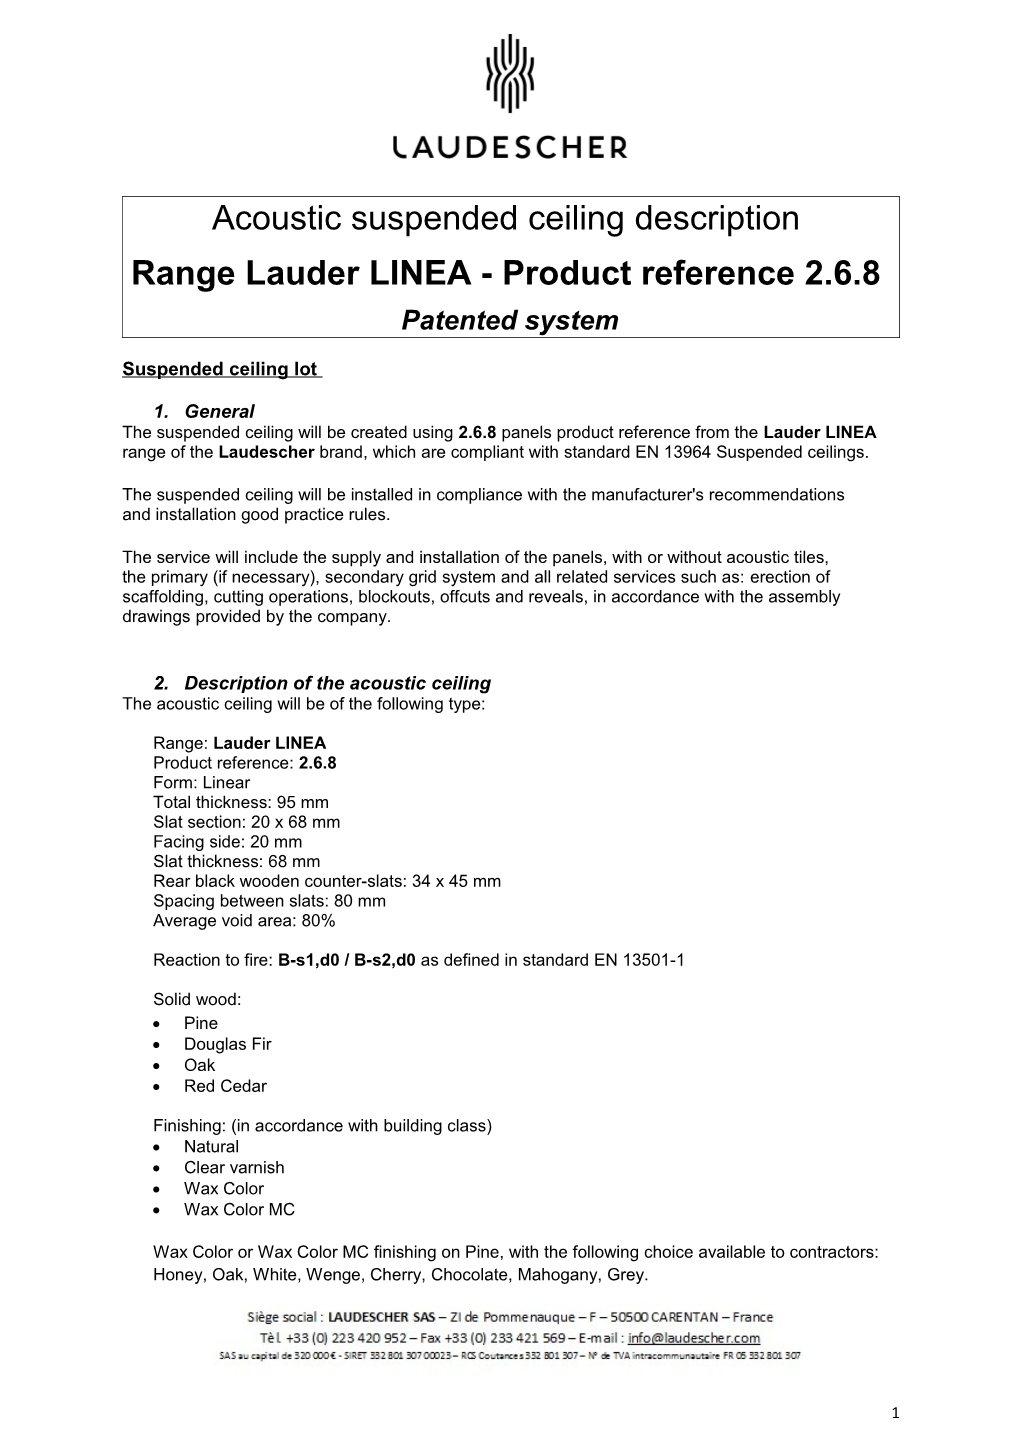 Range Lauder LINEA - Product Reference 2.6.8